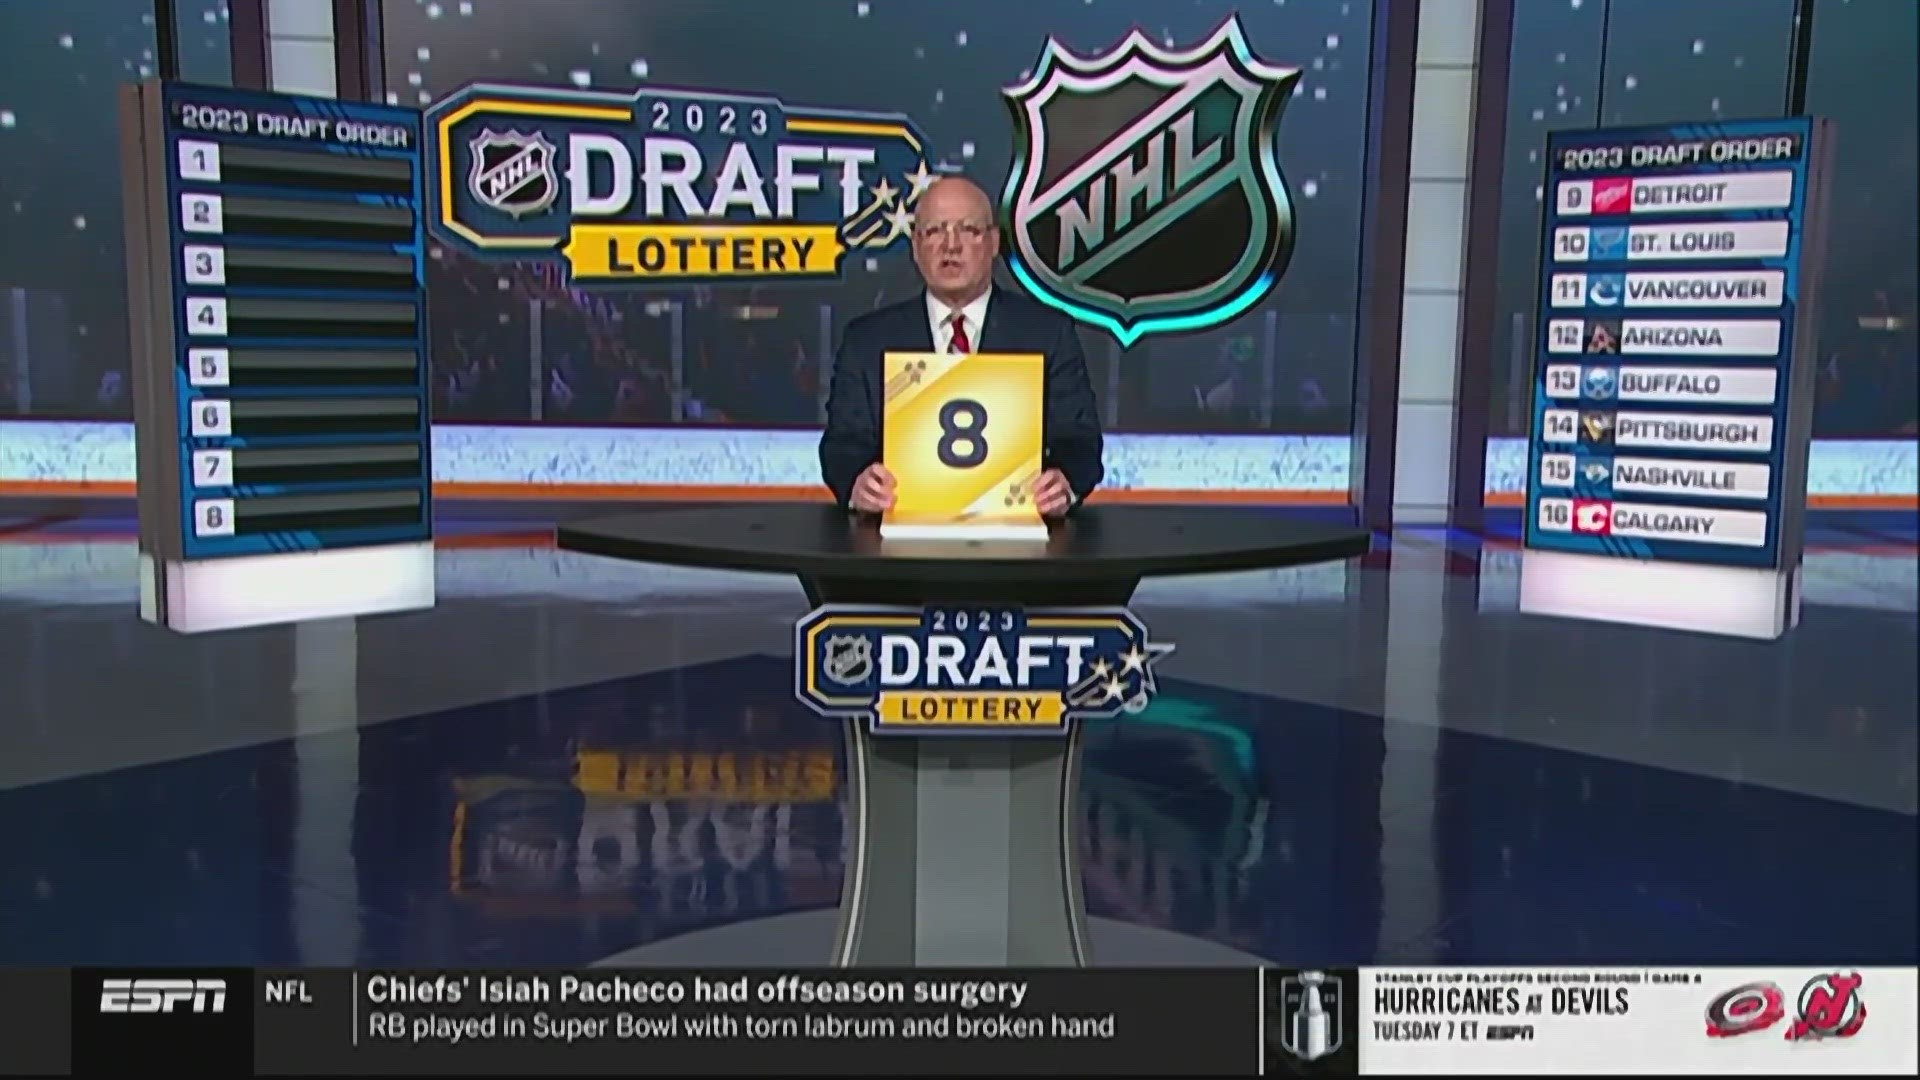 The Washington Capitals will choose 8th overall in the 2023 NHL draft.